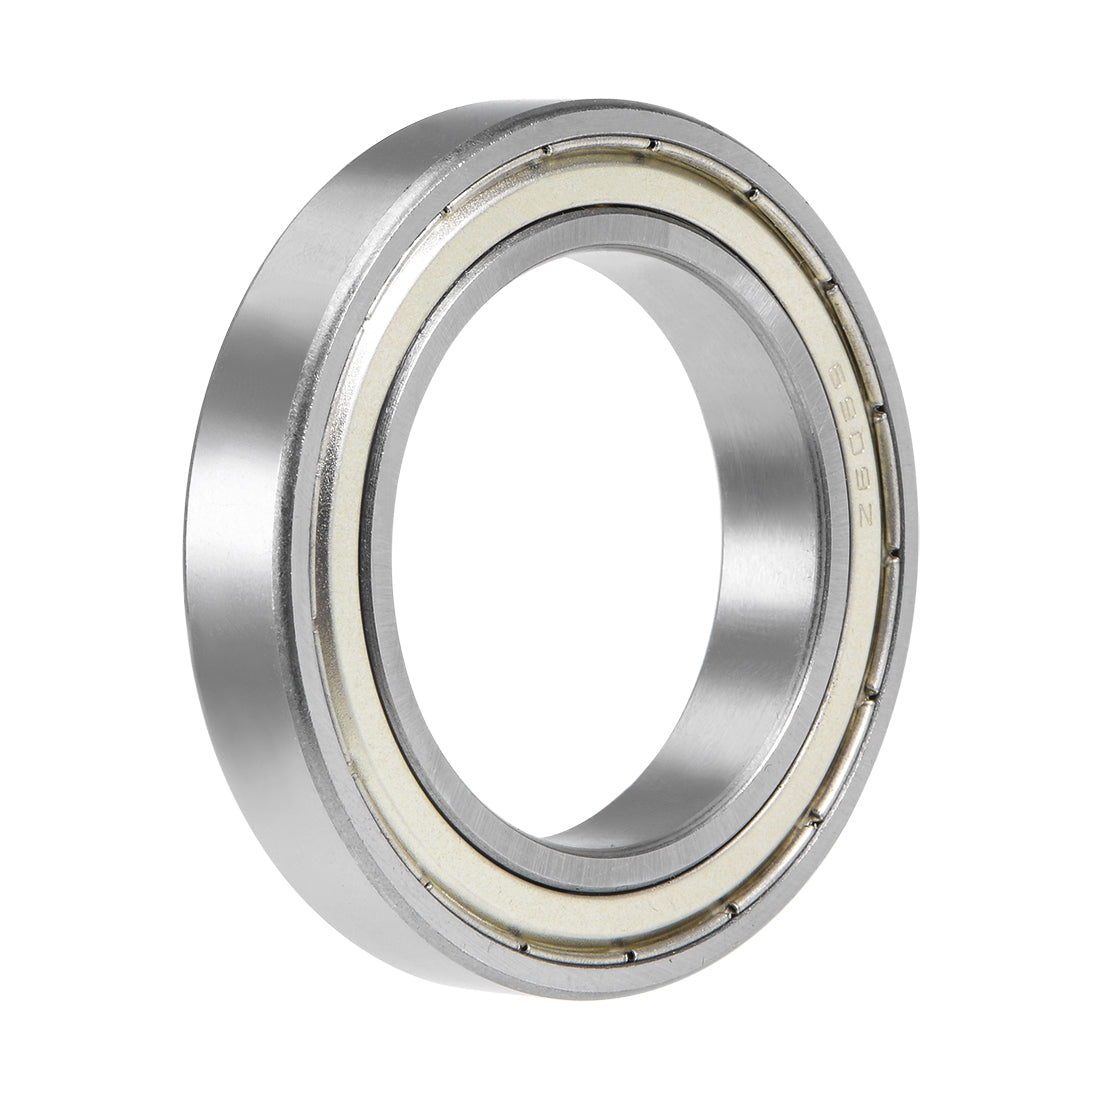 uxcell Uxcell Deep Groove Ball Bearings Metric Double Shielded Chrome Steel P0 Z1